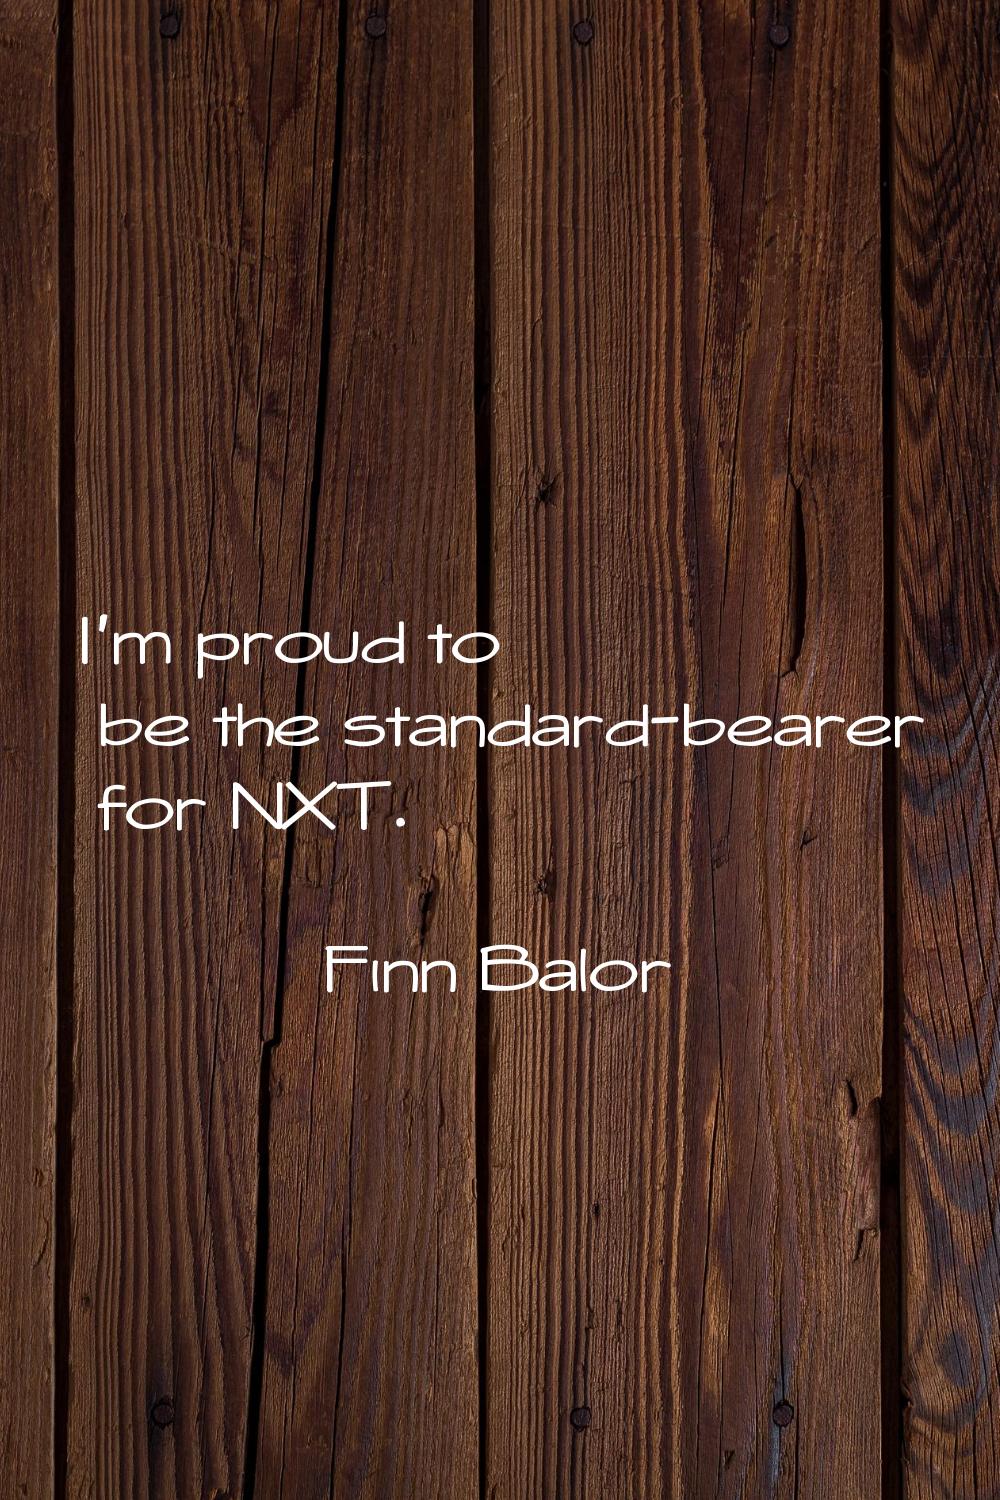 I'm proud to be the standard-bearer for NXT.